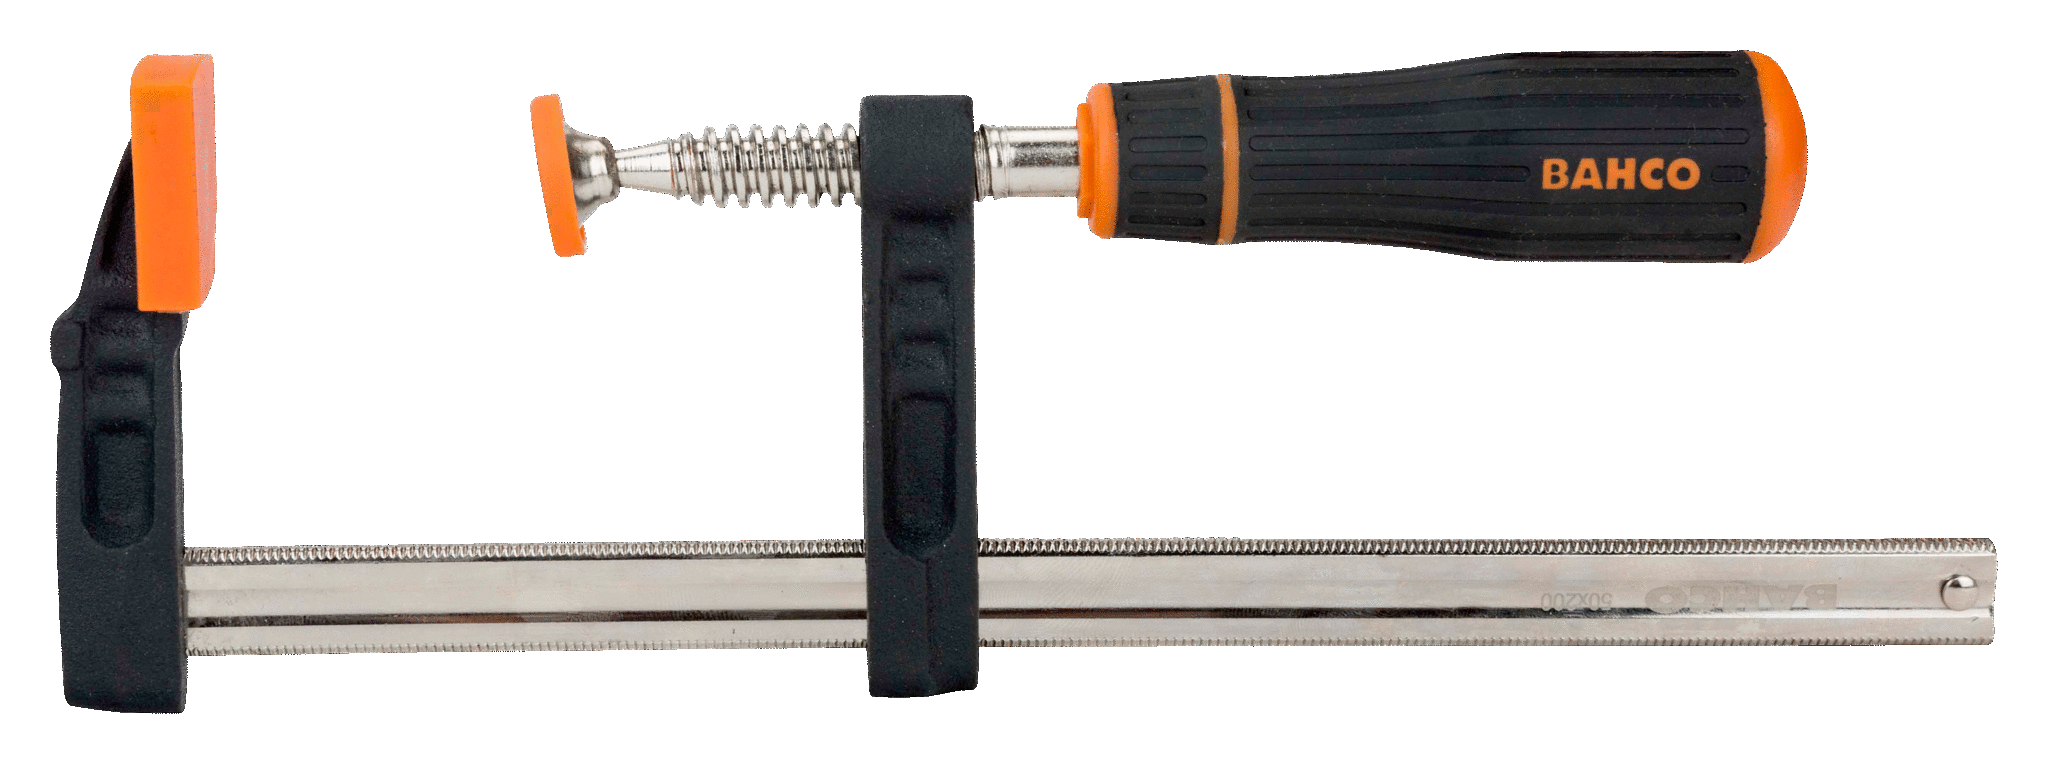 F-Clamps with Rubberised Handle - 420SH-120-300 by Bahco